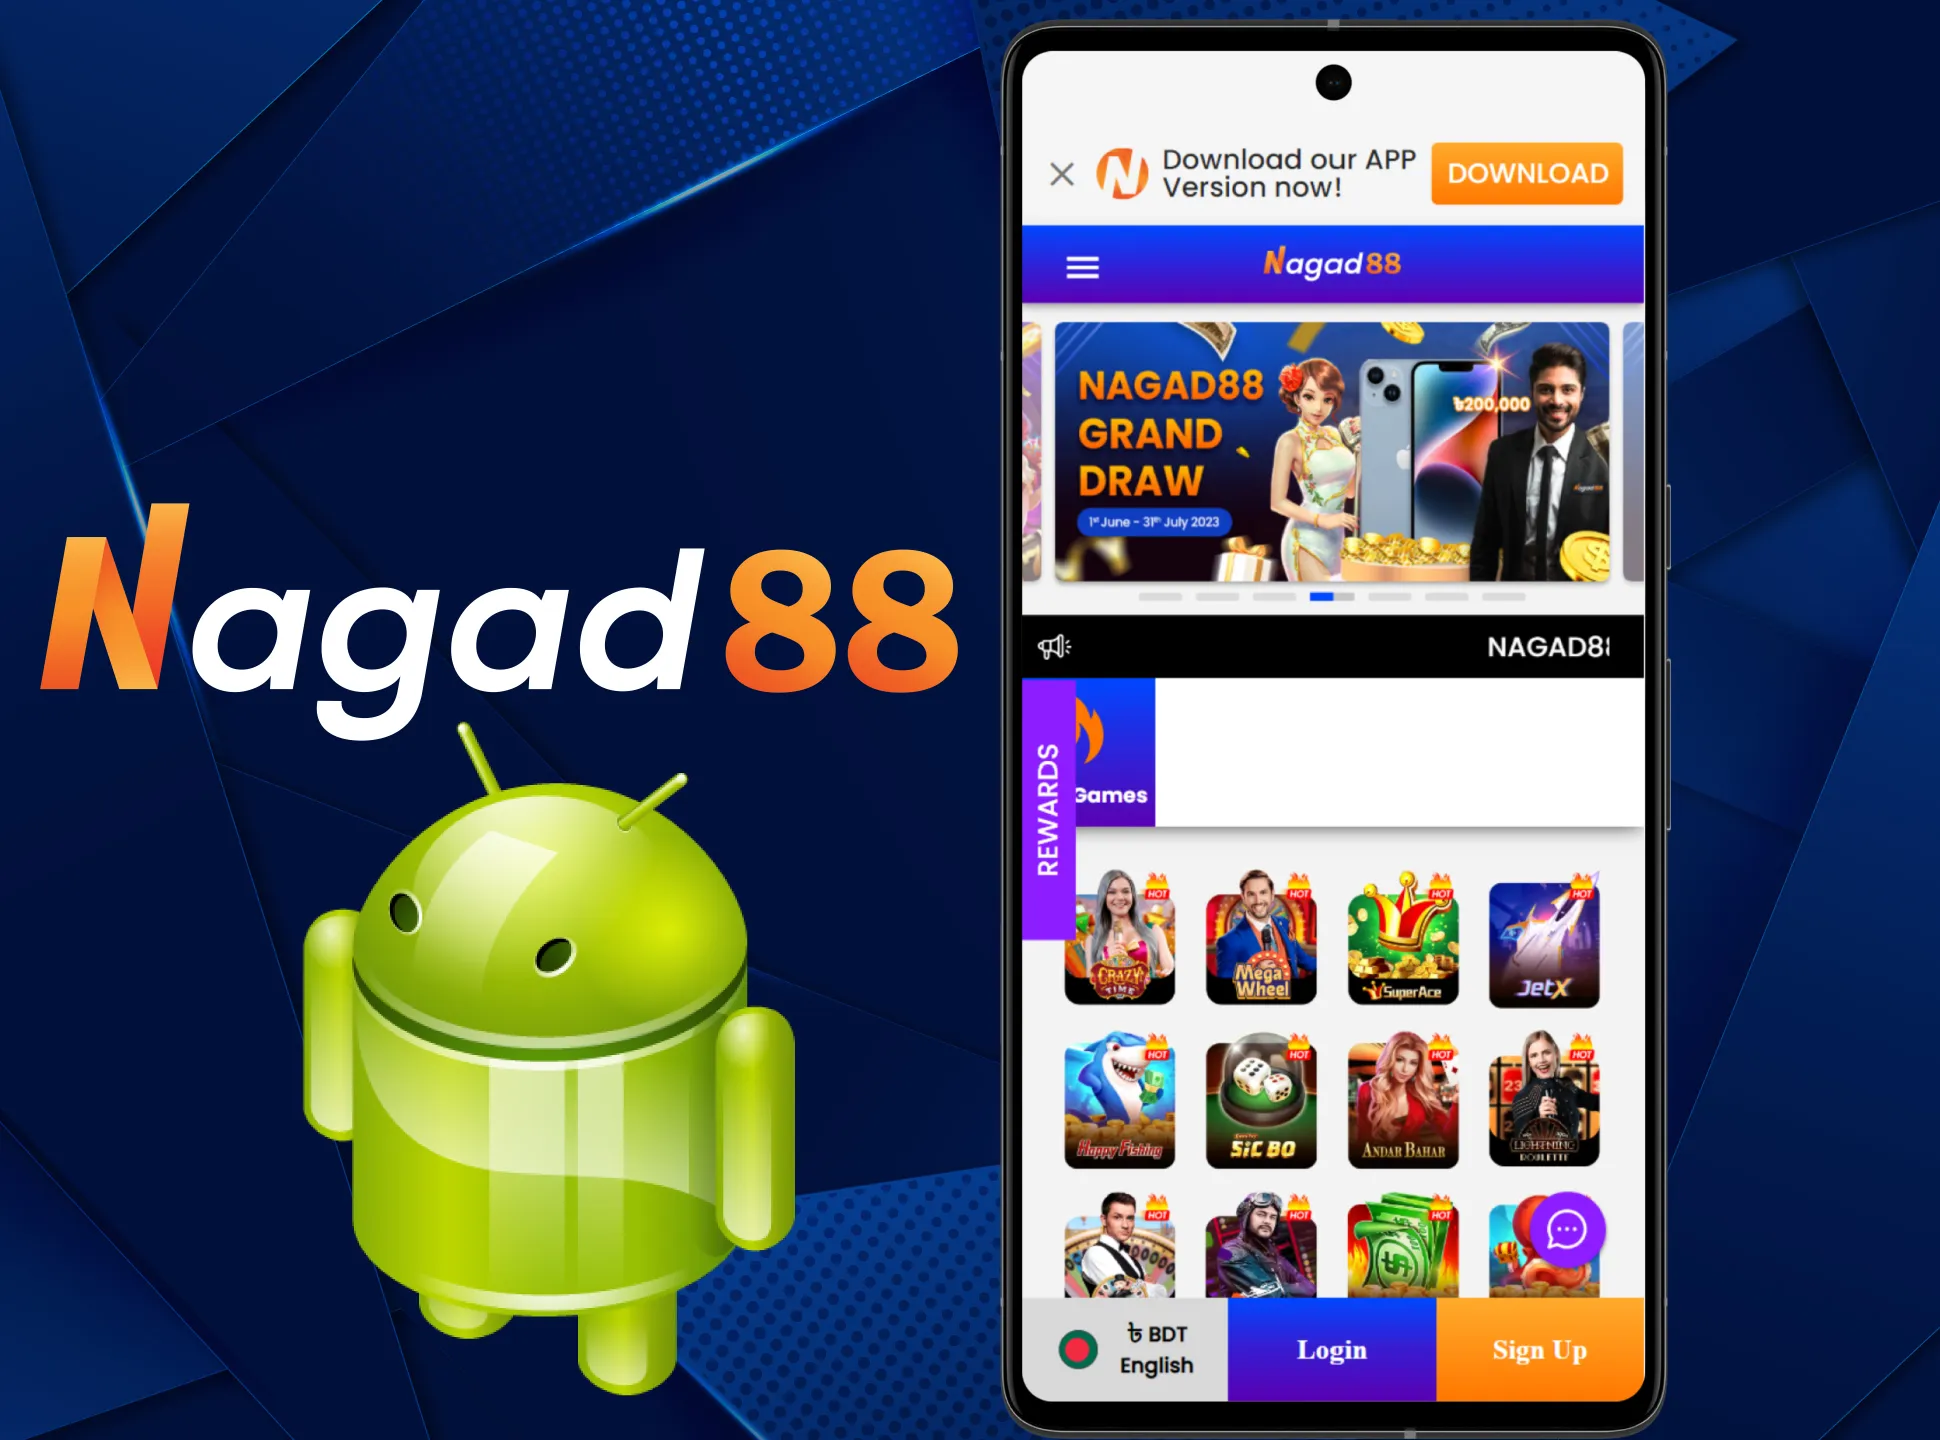 With Nagad88 you can place bets directly from your Android device through the special app.